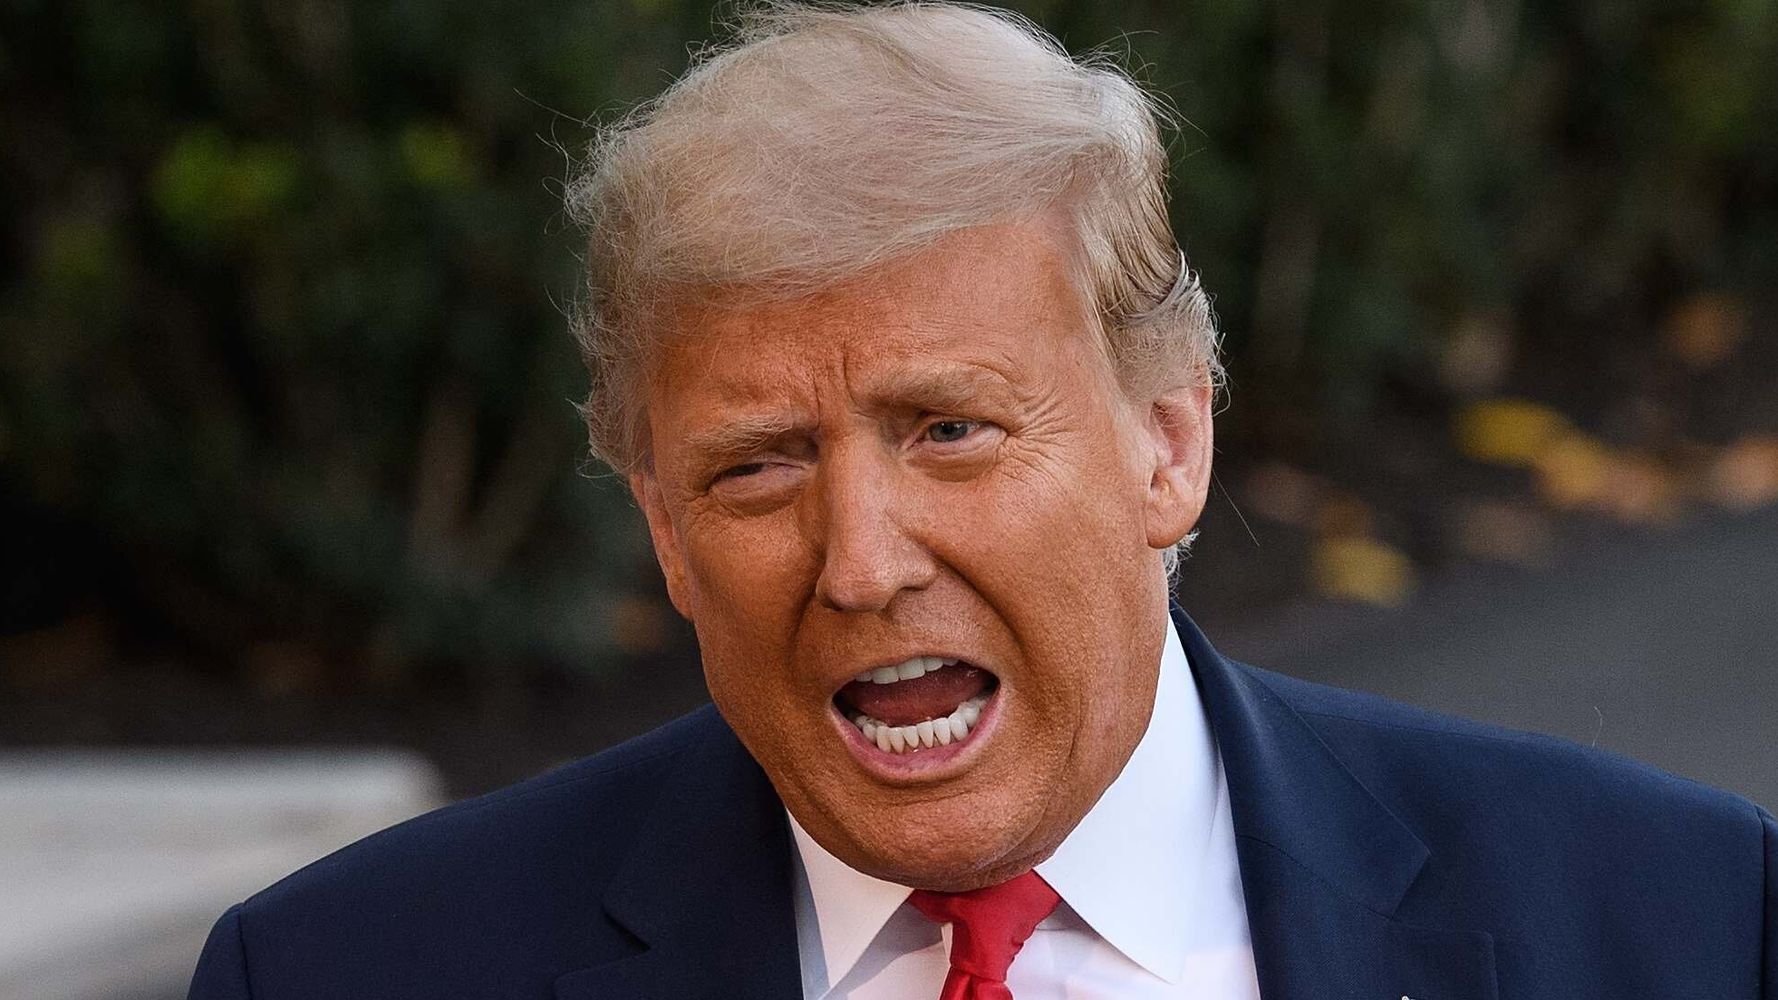 OOPS: Trump's New Attorney Admits Biden Won, Says Lawsuits 'Will Not Work'